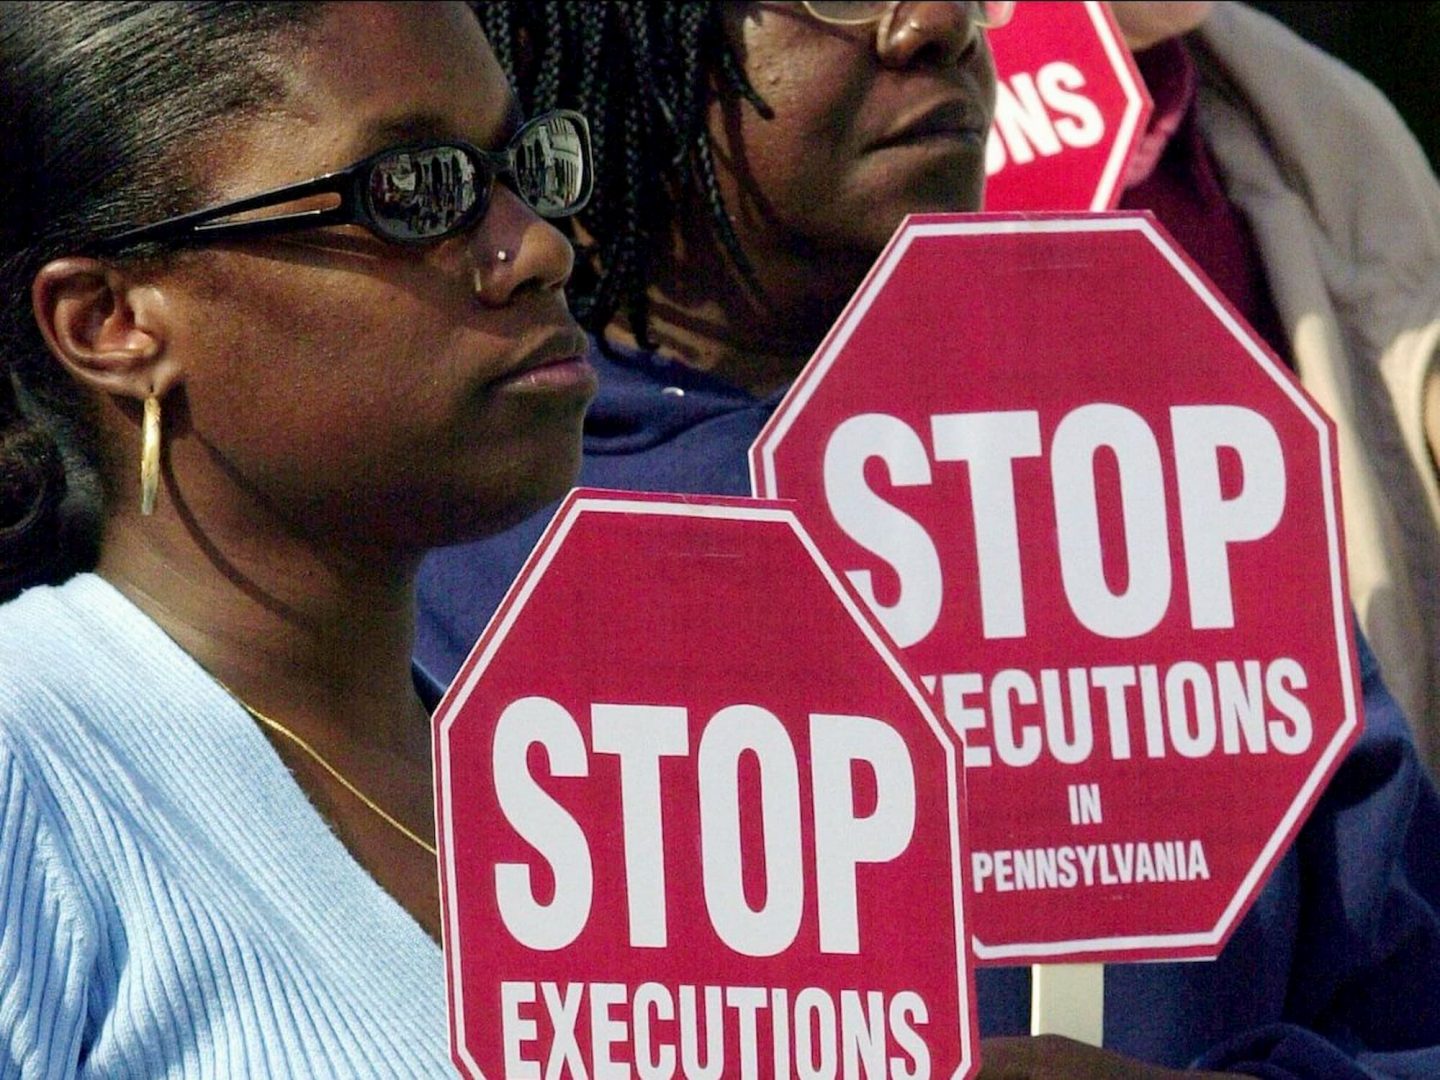 Protesters outside the capitol in Harrisburg on Oct. 11, 2003. It would be another 12 years before Gov Tom Wolf put a moratorium on executions. Until the death penalty is legally abolished, the state continues to issue execution warrants to death row inmates. (AP Photo/Brad C. Bower) 